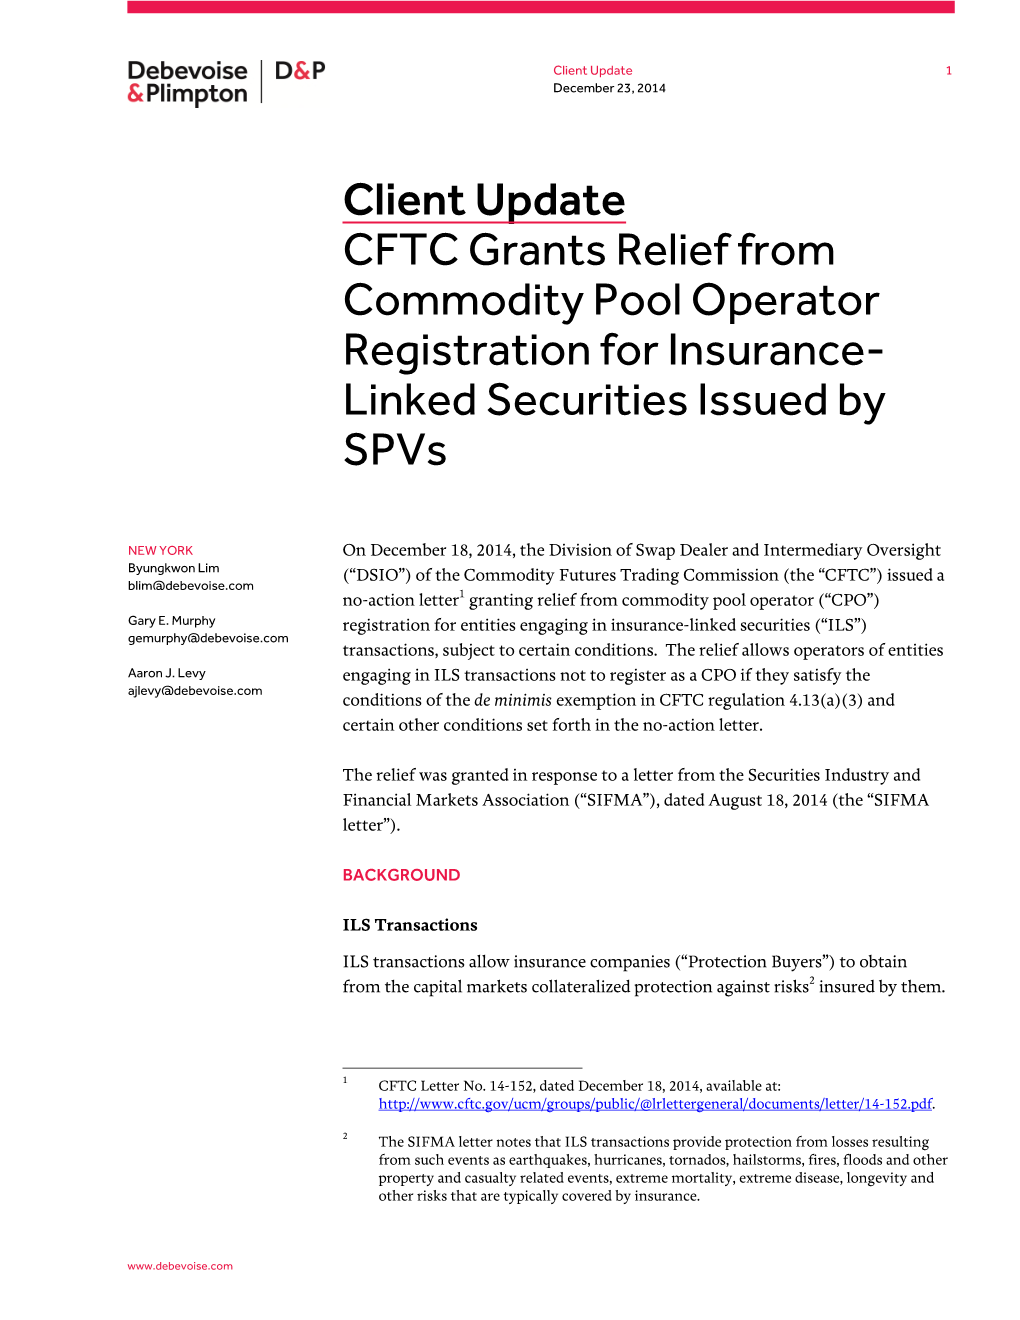 Client Update CFTC Grants Relief from Commodity Pool Operator Registration for Insurance- Linked Securities Issued by Spvs